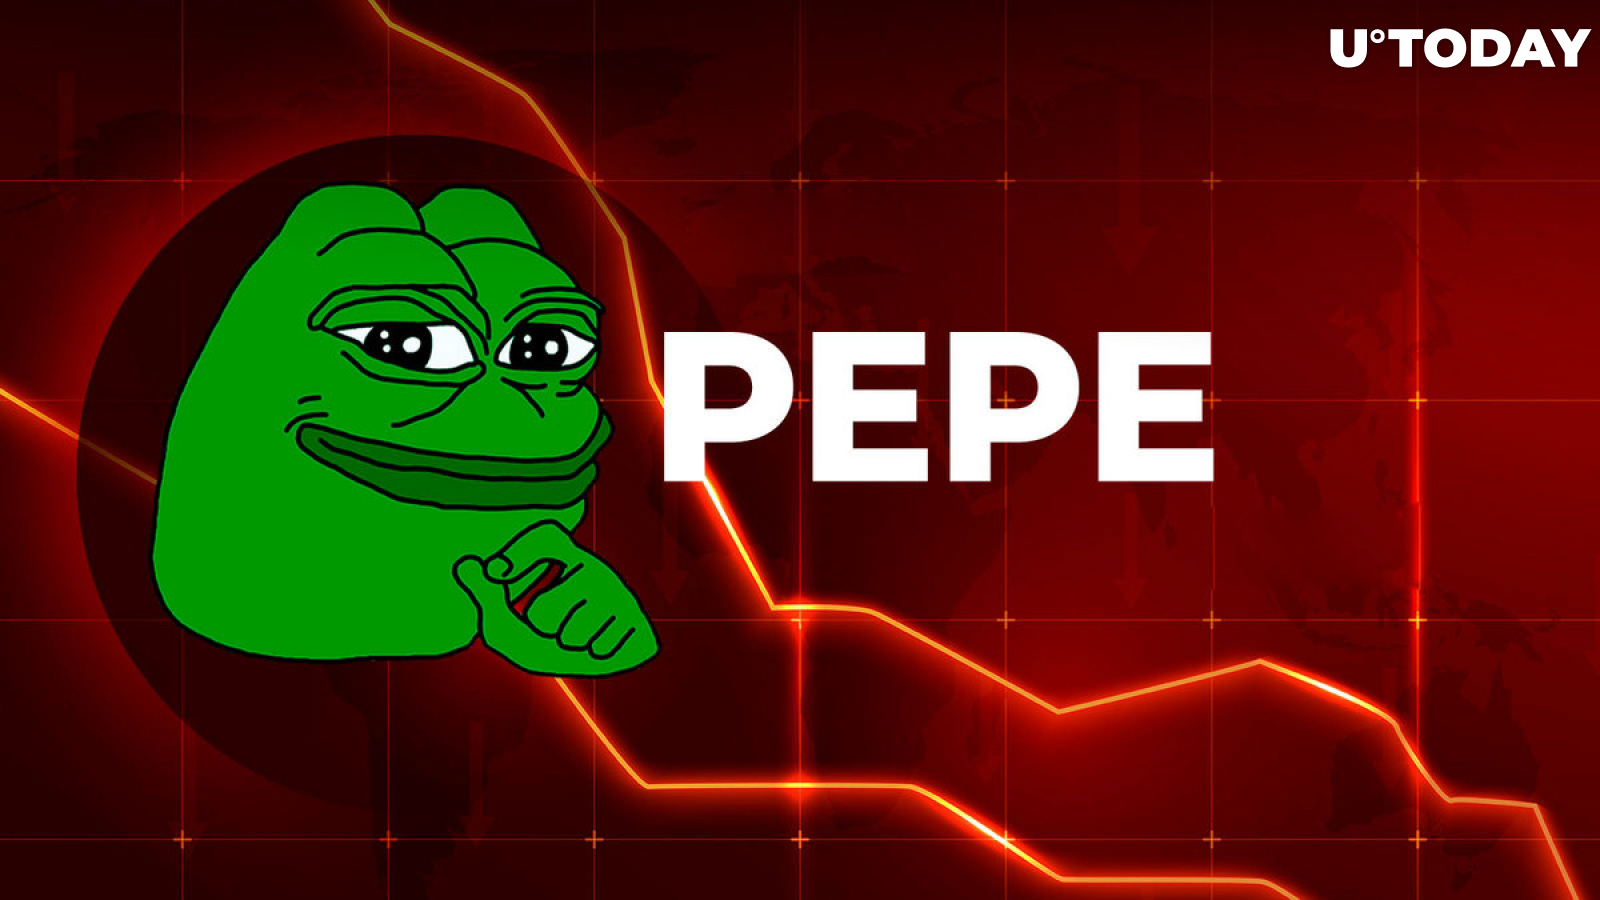 PEPE Down 15% to End Second Week in Losses, Where Is Frog Hype?